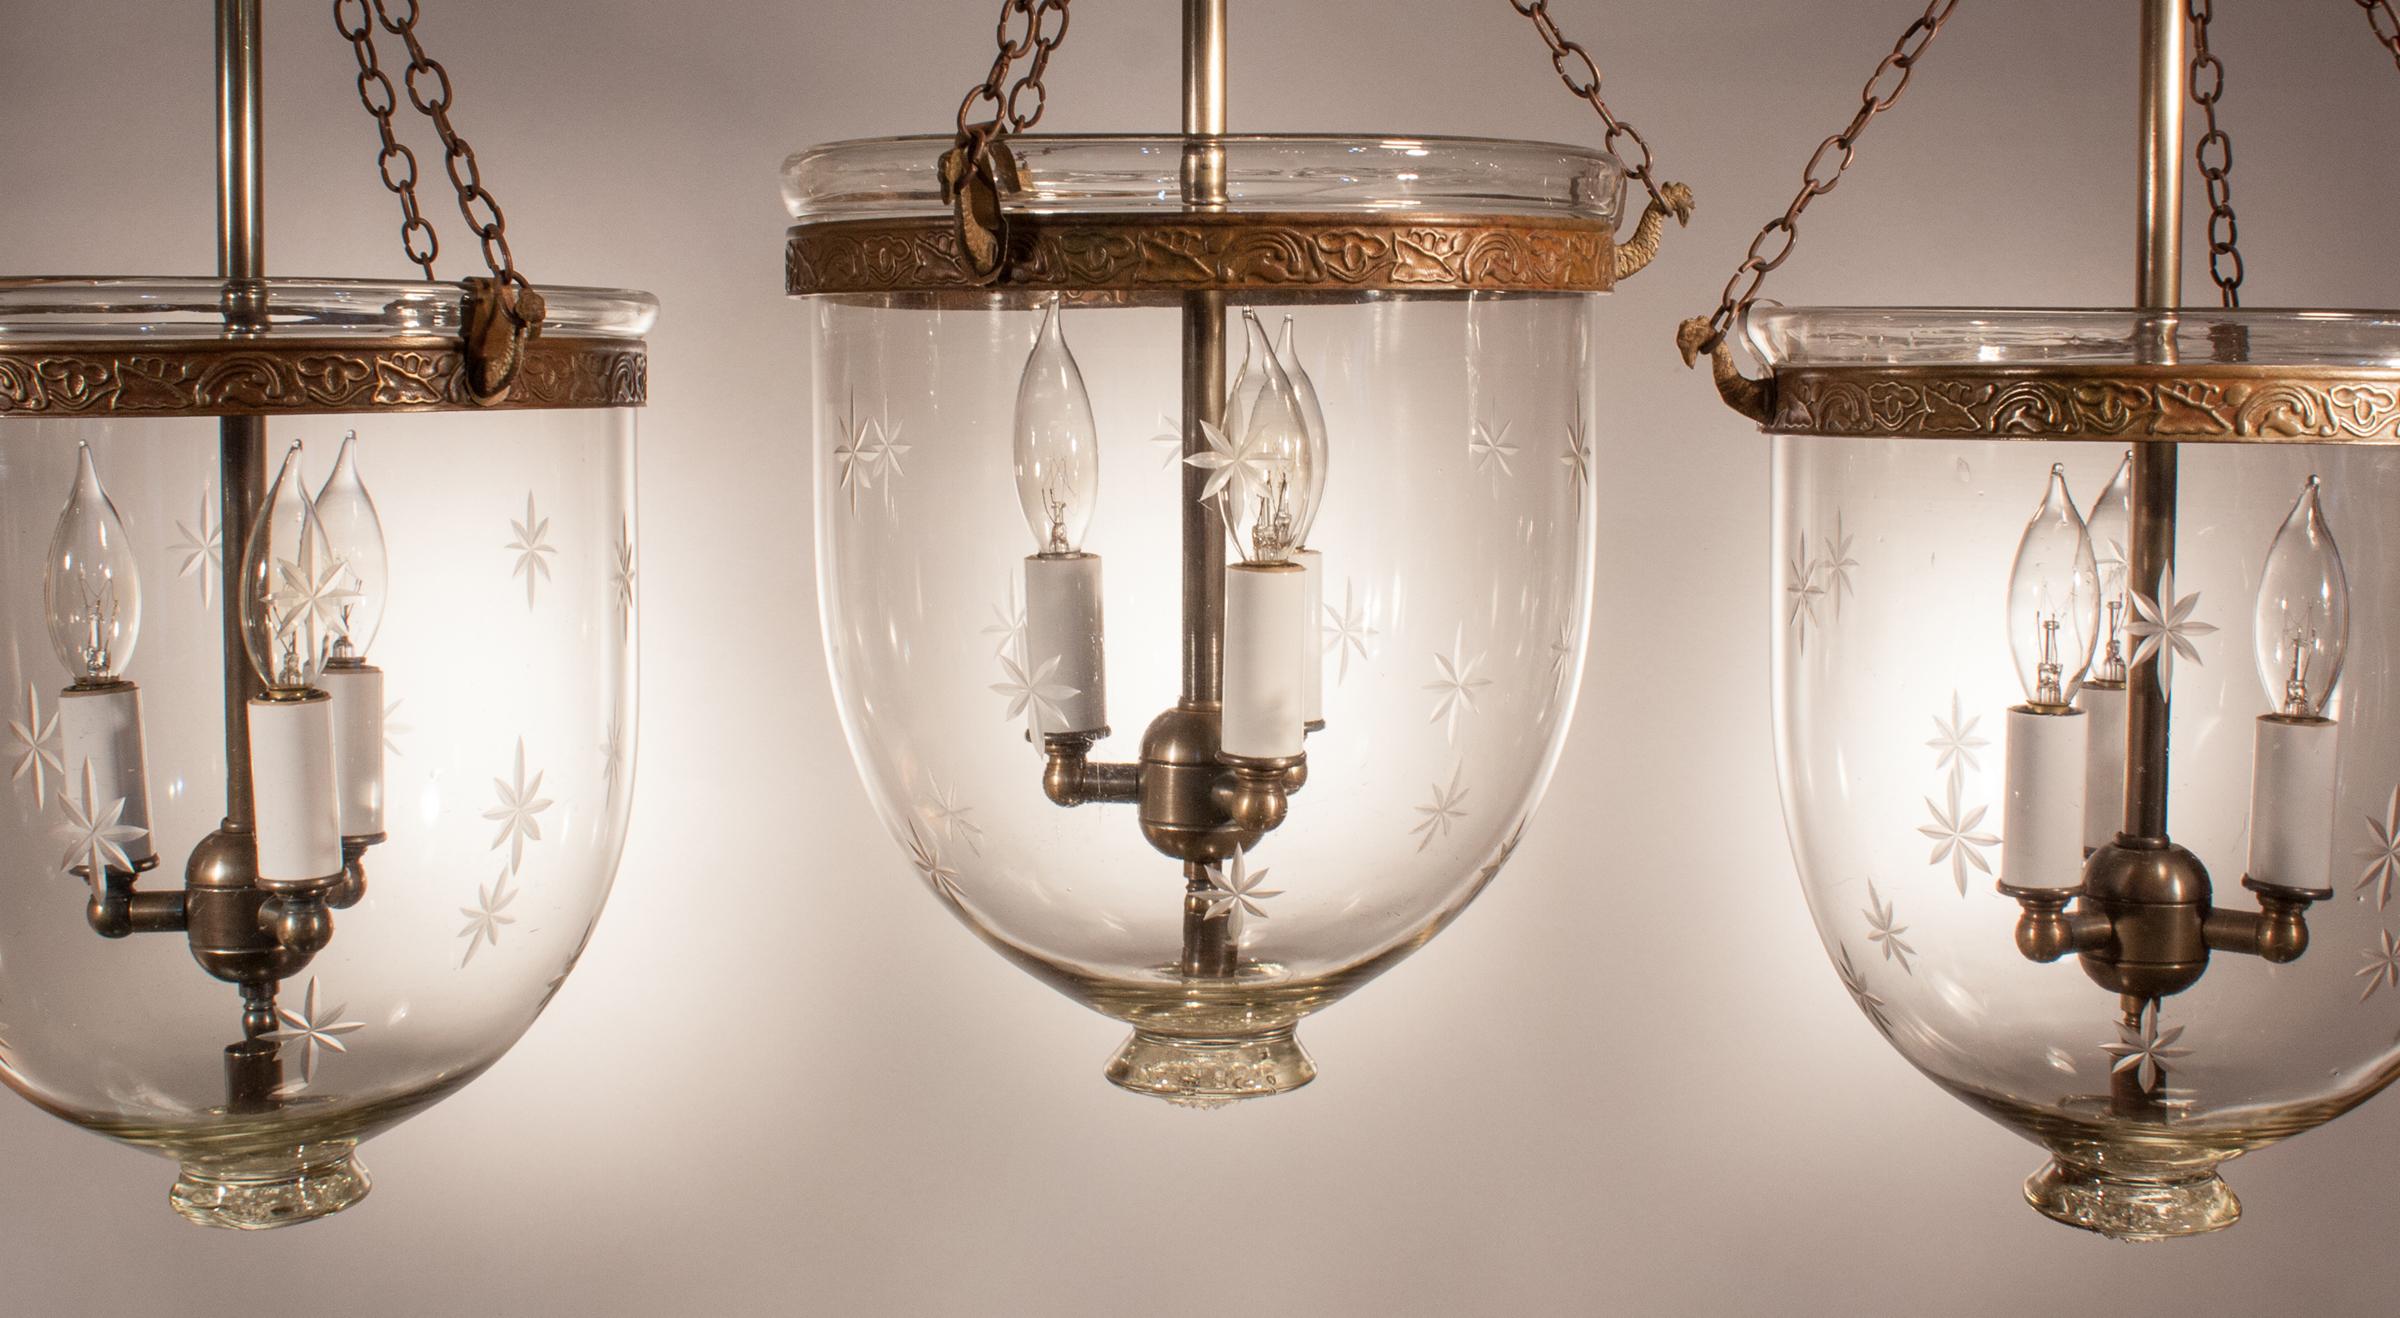 A rare, well-matched set of three antique English bell jar lanterns with an etched star motif, circa 1910. These charming lanterns have their original smoke bells/lids; however, the embossed brass bands and chains have been replaced for the security